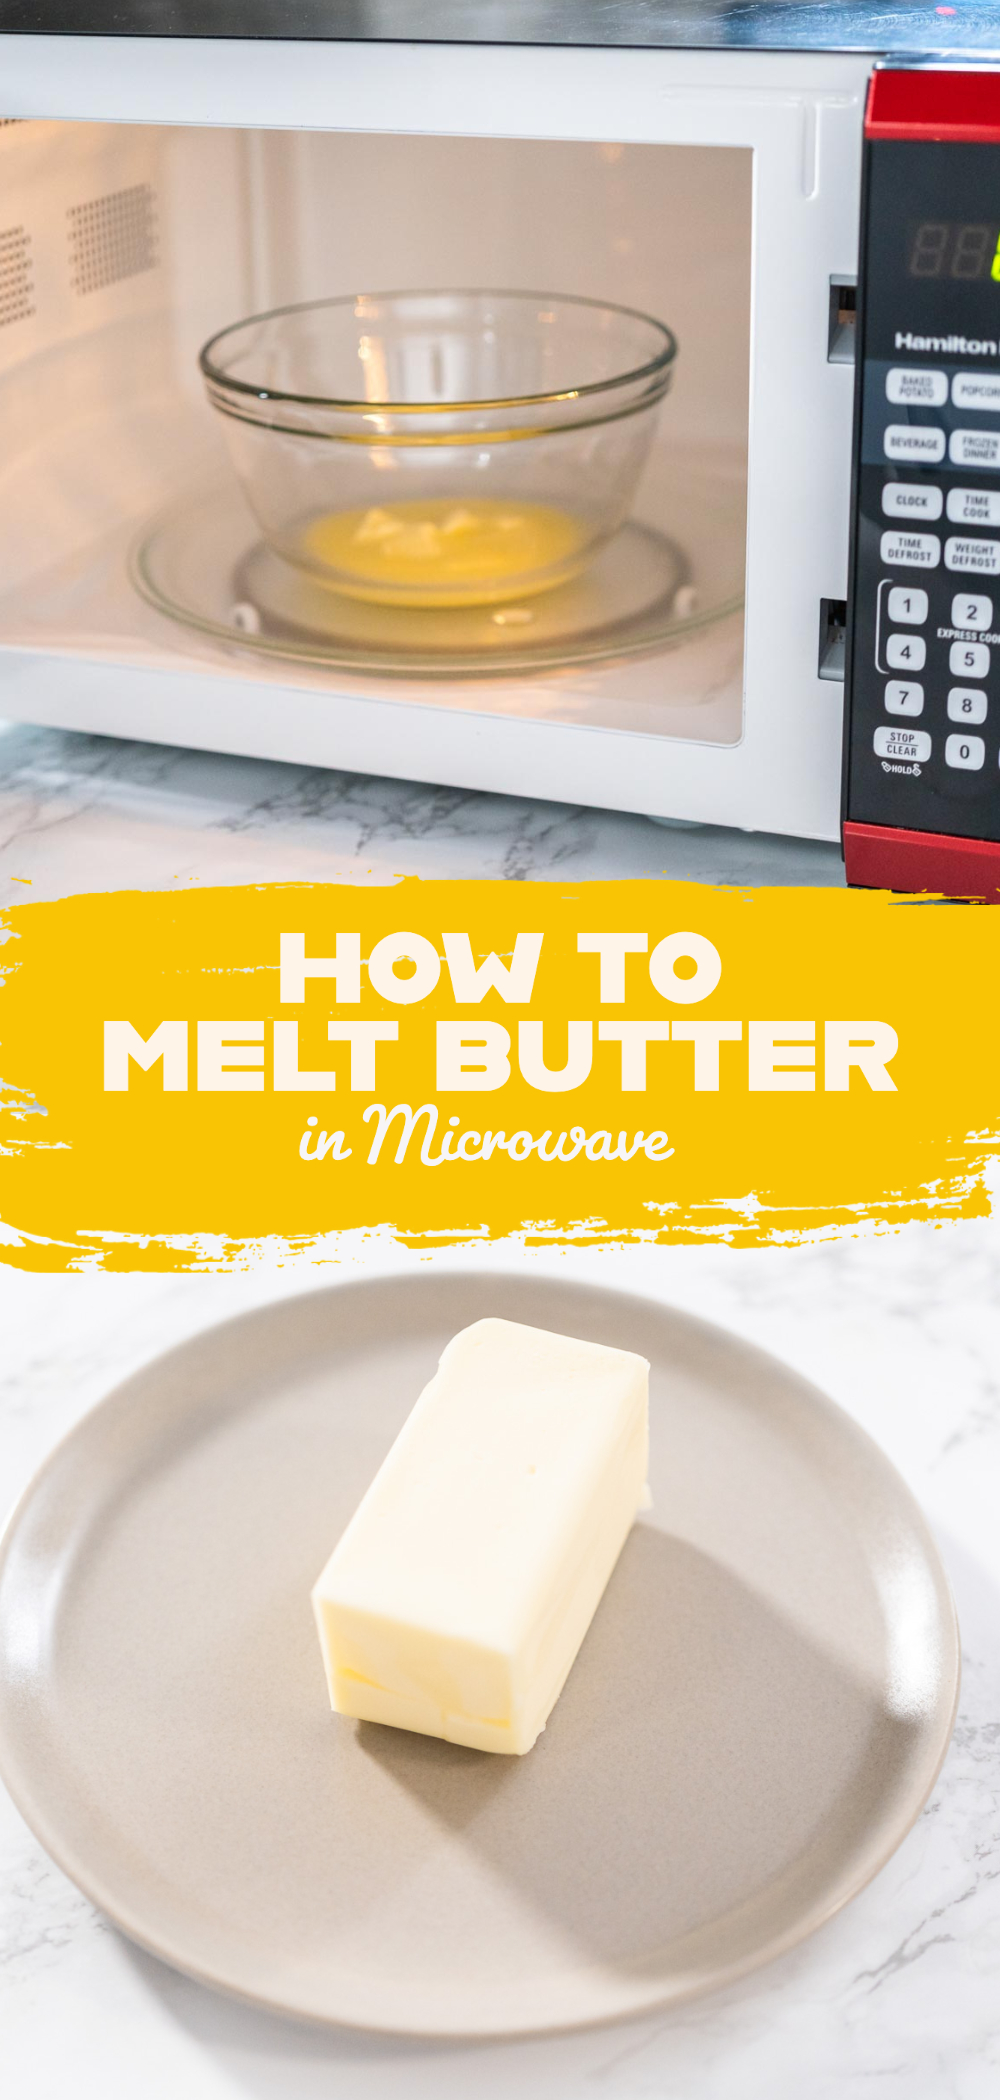 How to Melt Butter in Microwave